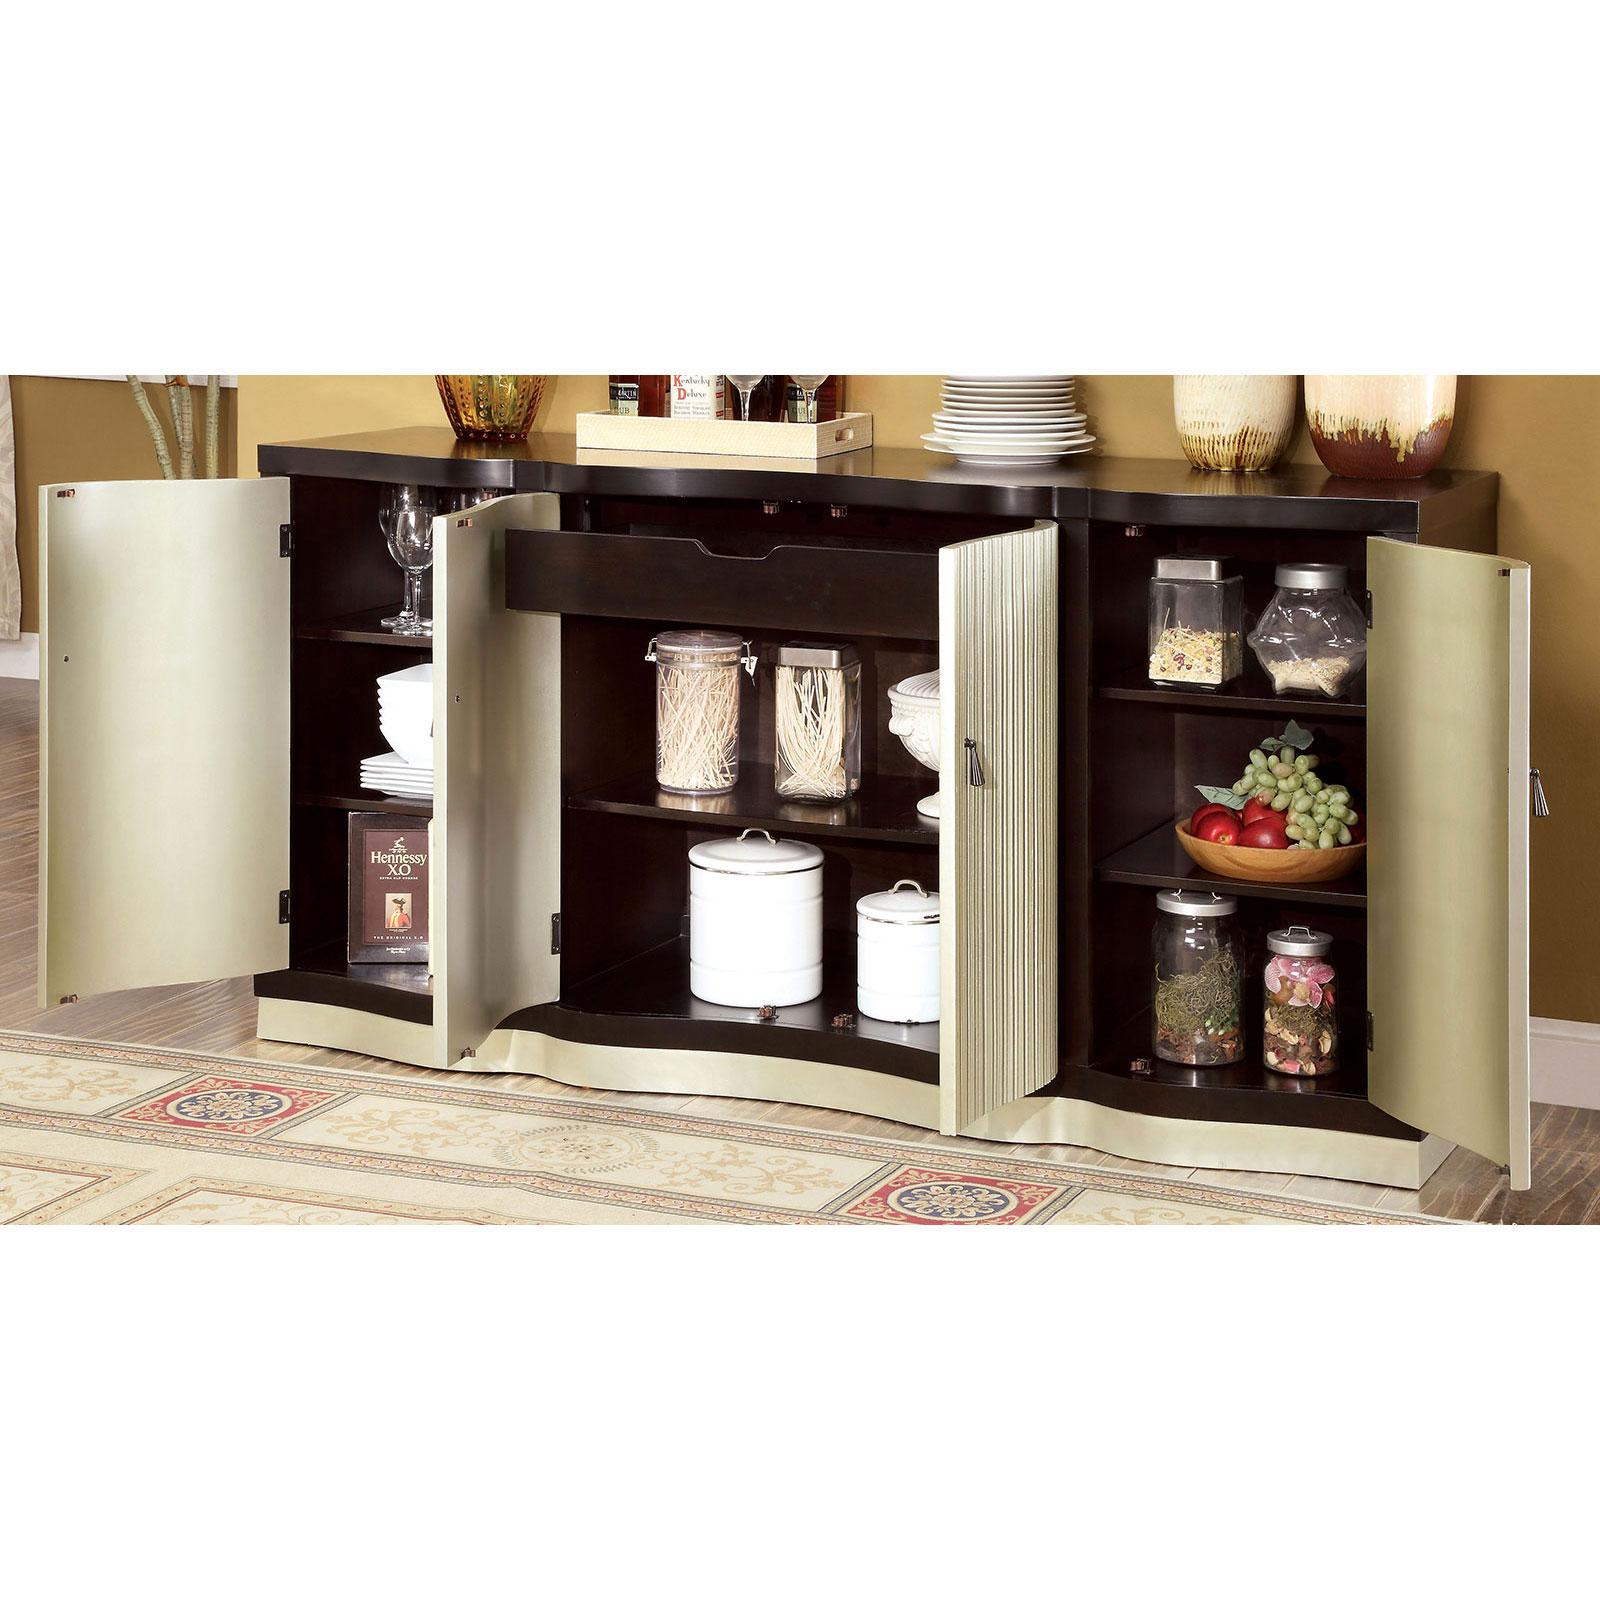 https://nyfurnitureoutlets.com/products/transitional-wood-server-in-brown-ornette-by-furniture-of-america/1x1/138505-2-127862187101.jpg